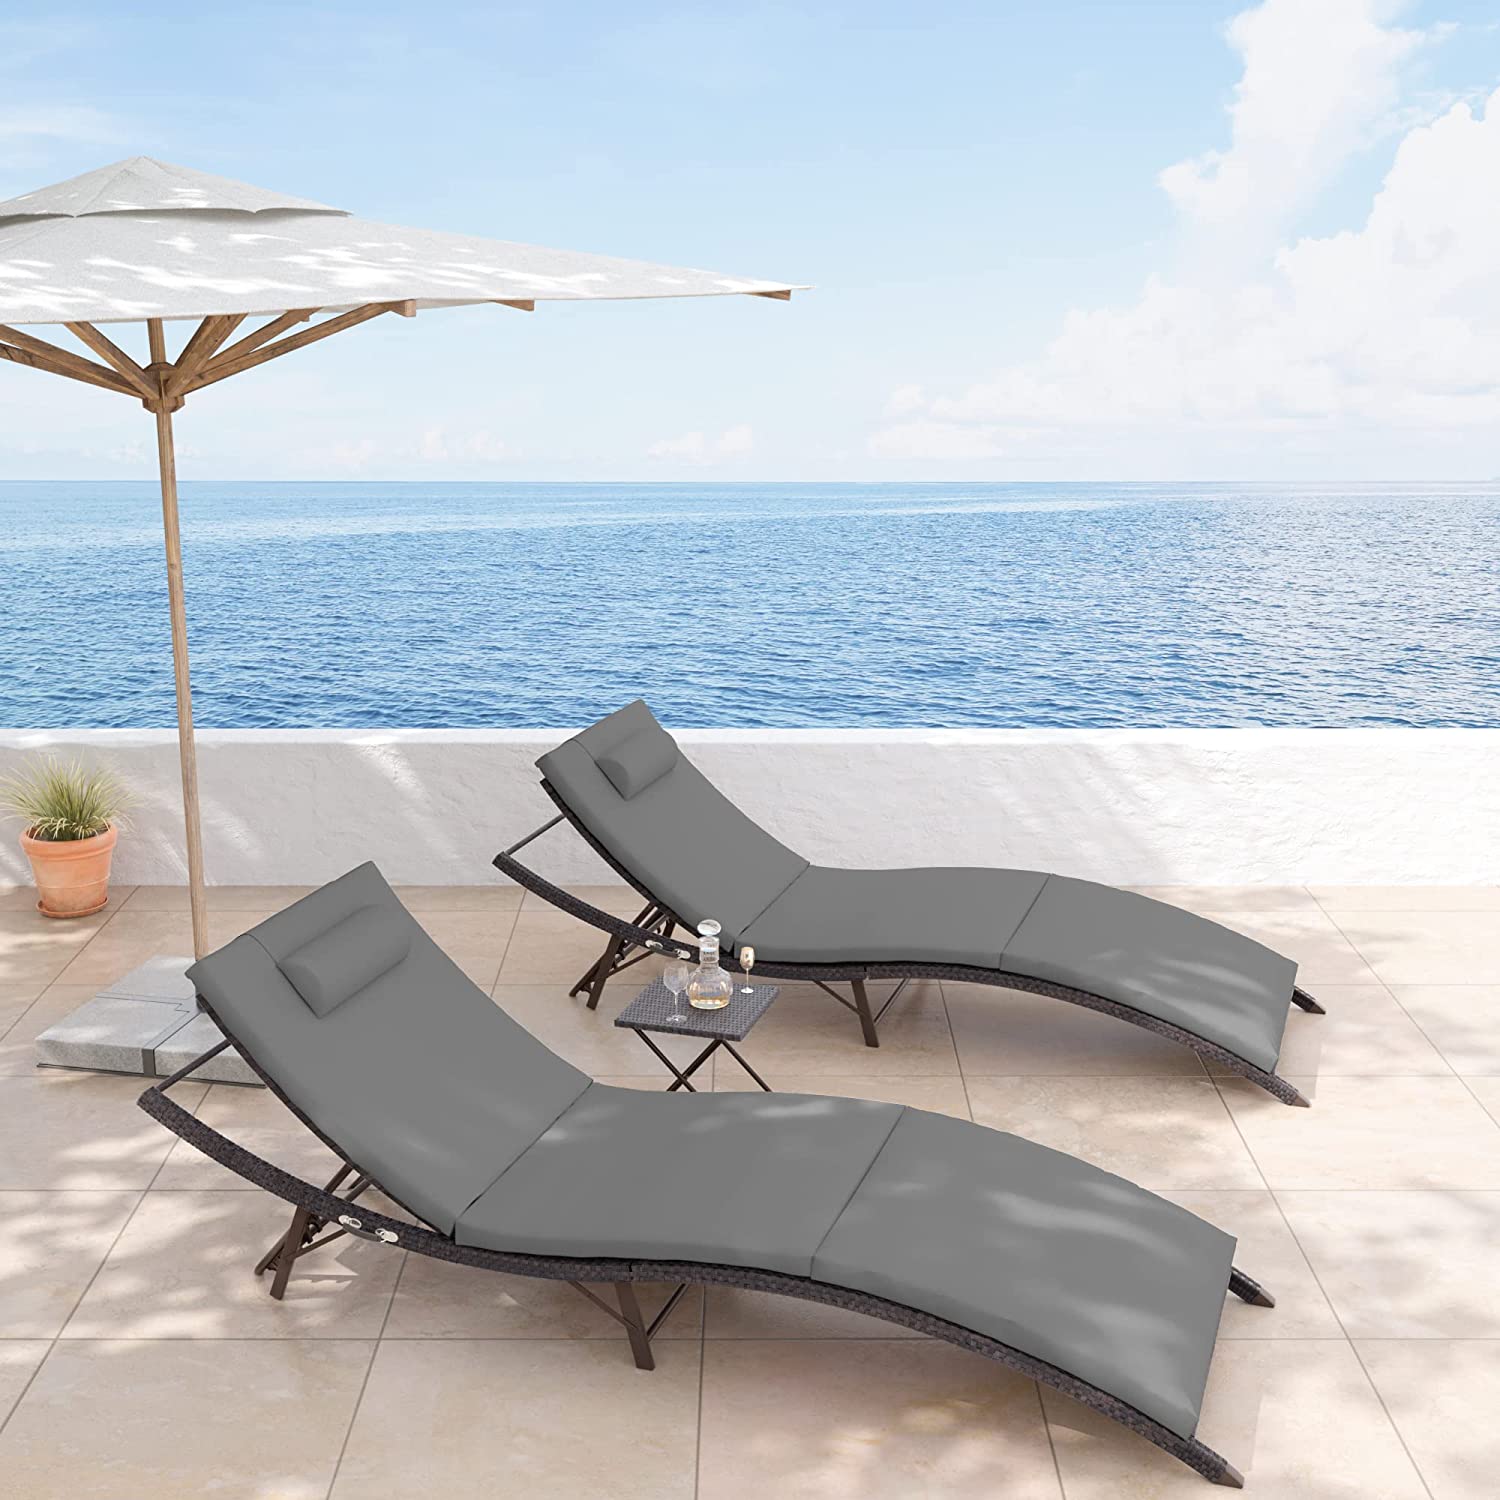 Kullavik Patio Chaise Lounge Set 3 Pieces Outdoor Lounge Chair Outdoor Wicker Lounge Chairs with Table Folding Chaise Lounger for Poolside Backyard Porch,Grey - image 2 of 7